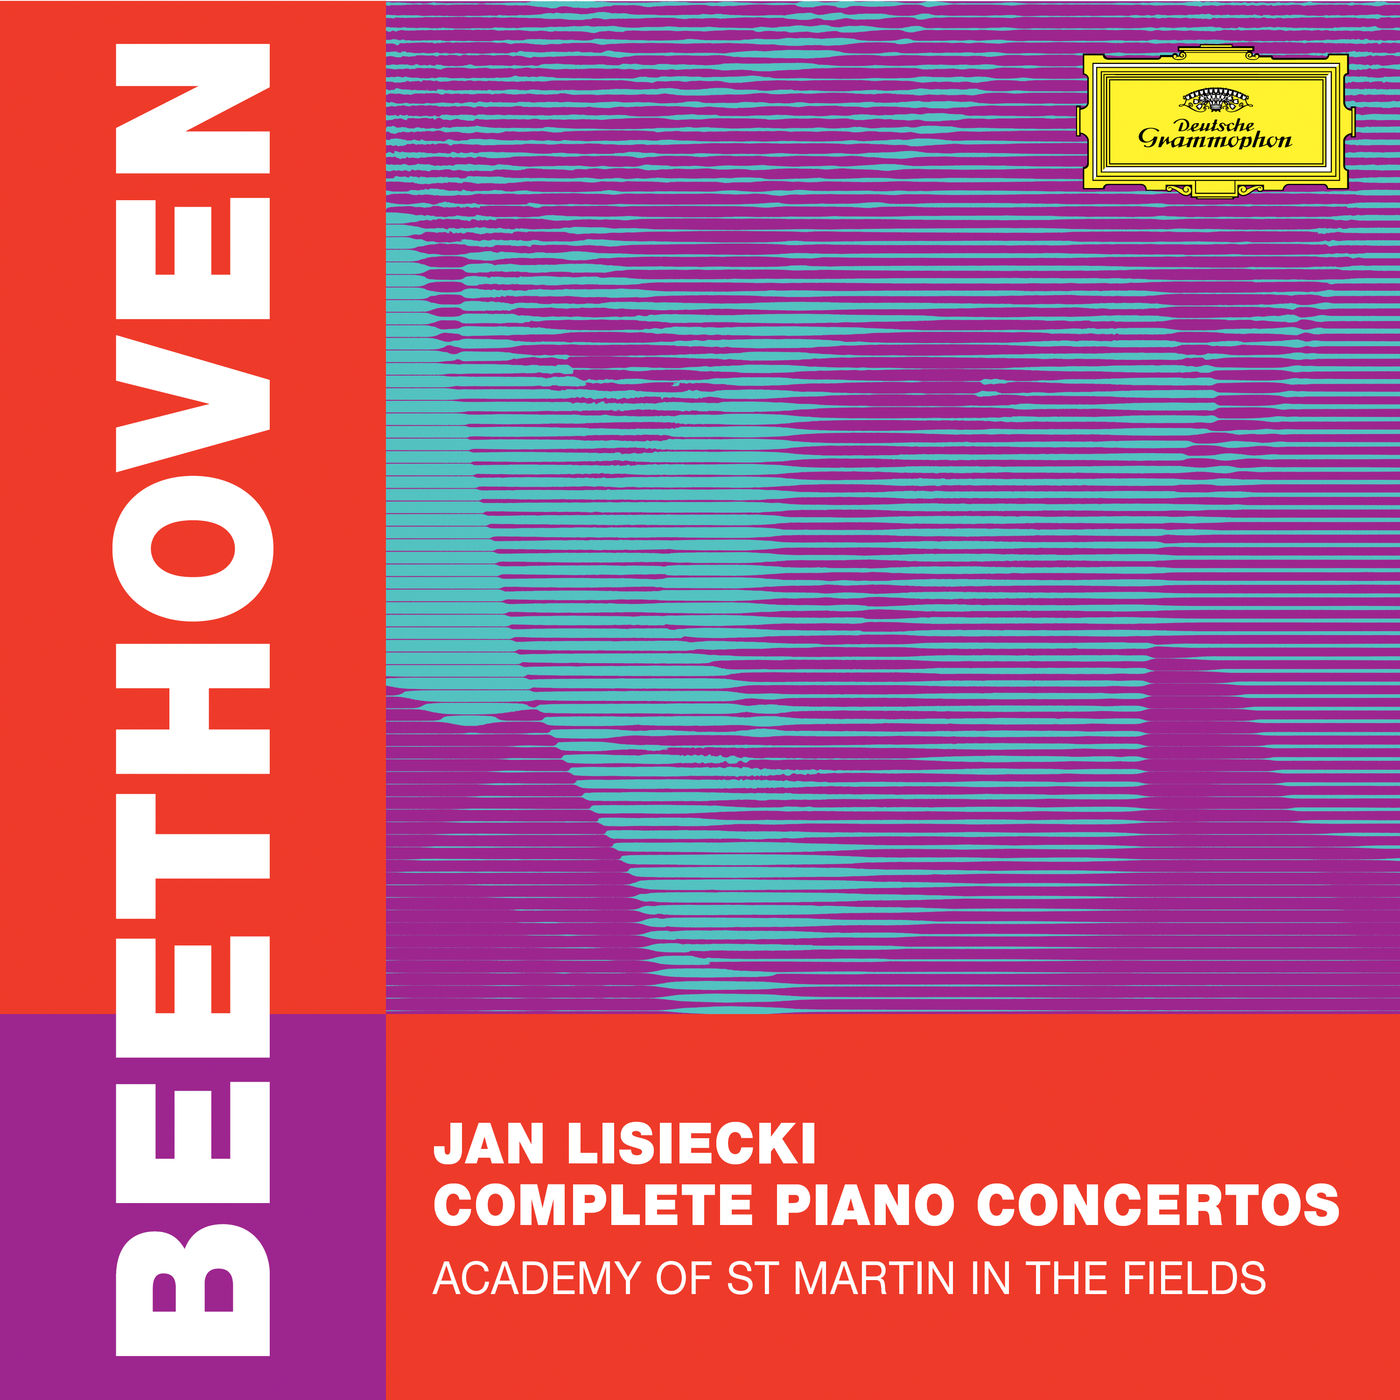 Jan Lisiecki & Academy of St. Martin in the Fields – Beethoven: Complete Piano Concertos (2018) [FLAC 24bit/48kHz]